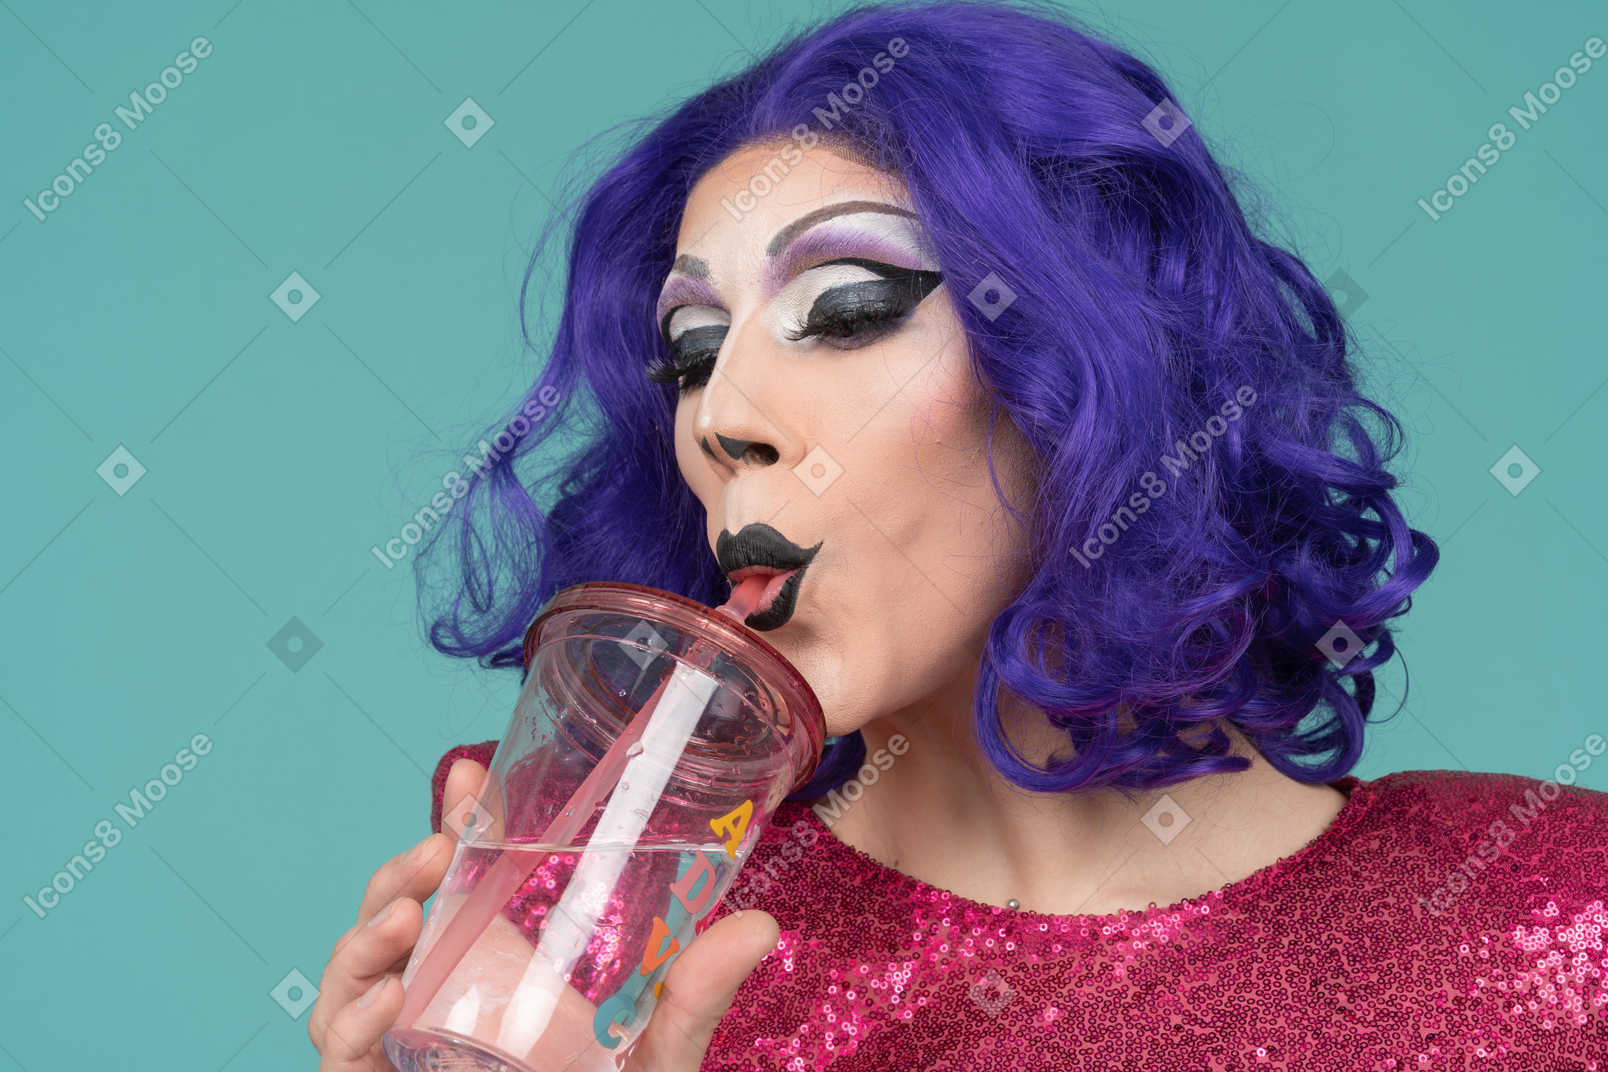 Close-up of a drag queen sipping on a drink through straw